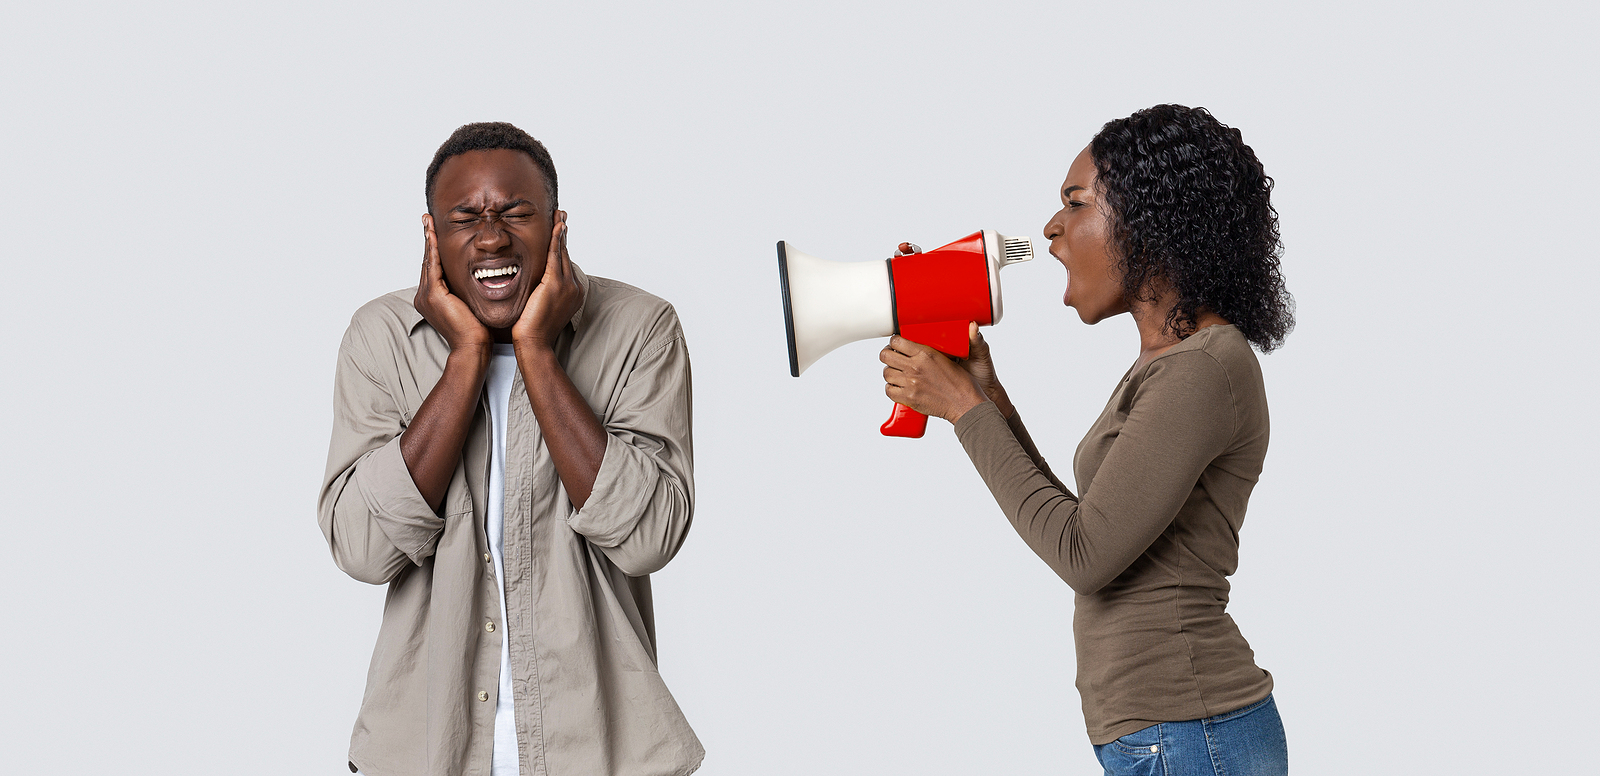 A woman yells at a man through a megaphone, he is wincing covering his ears.